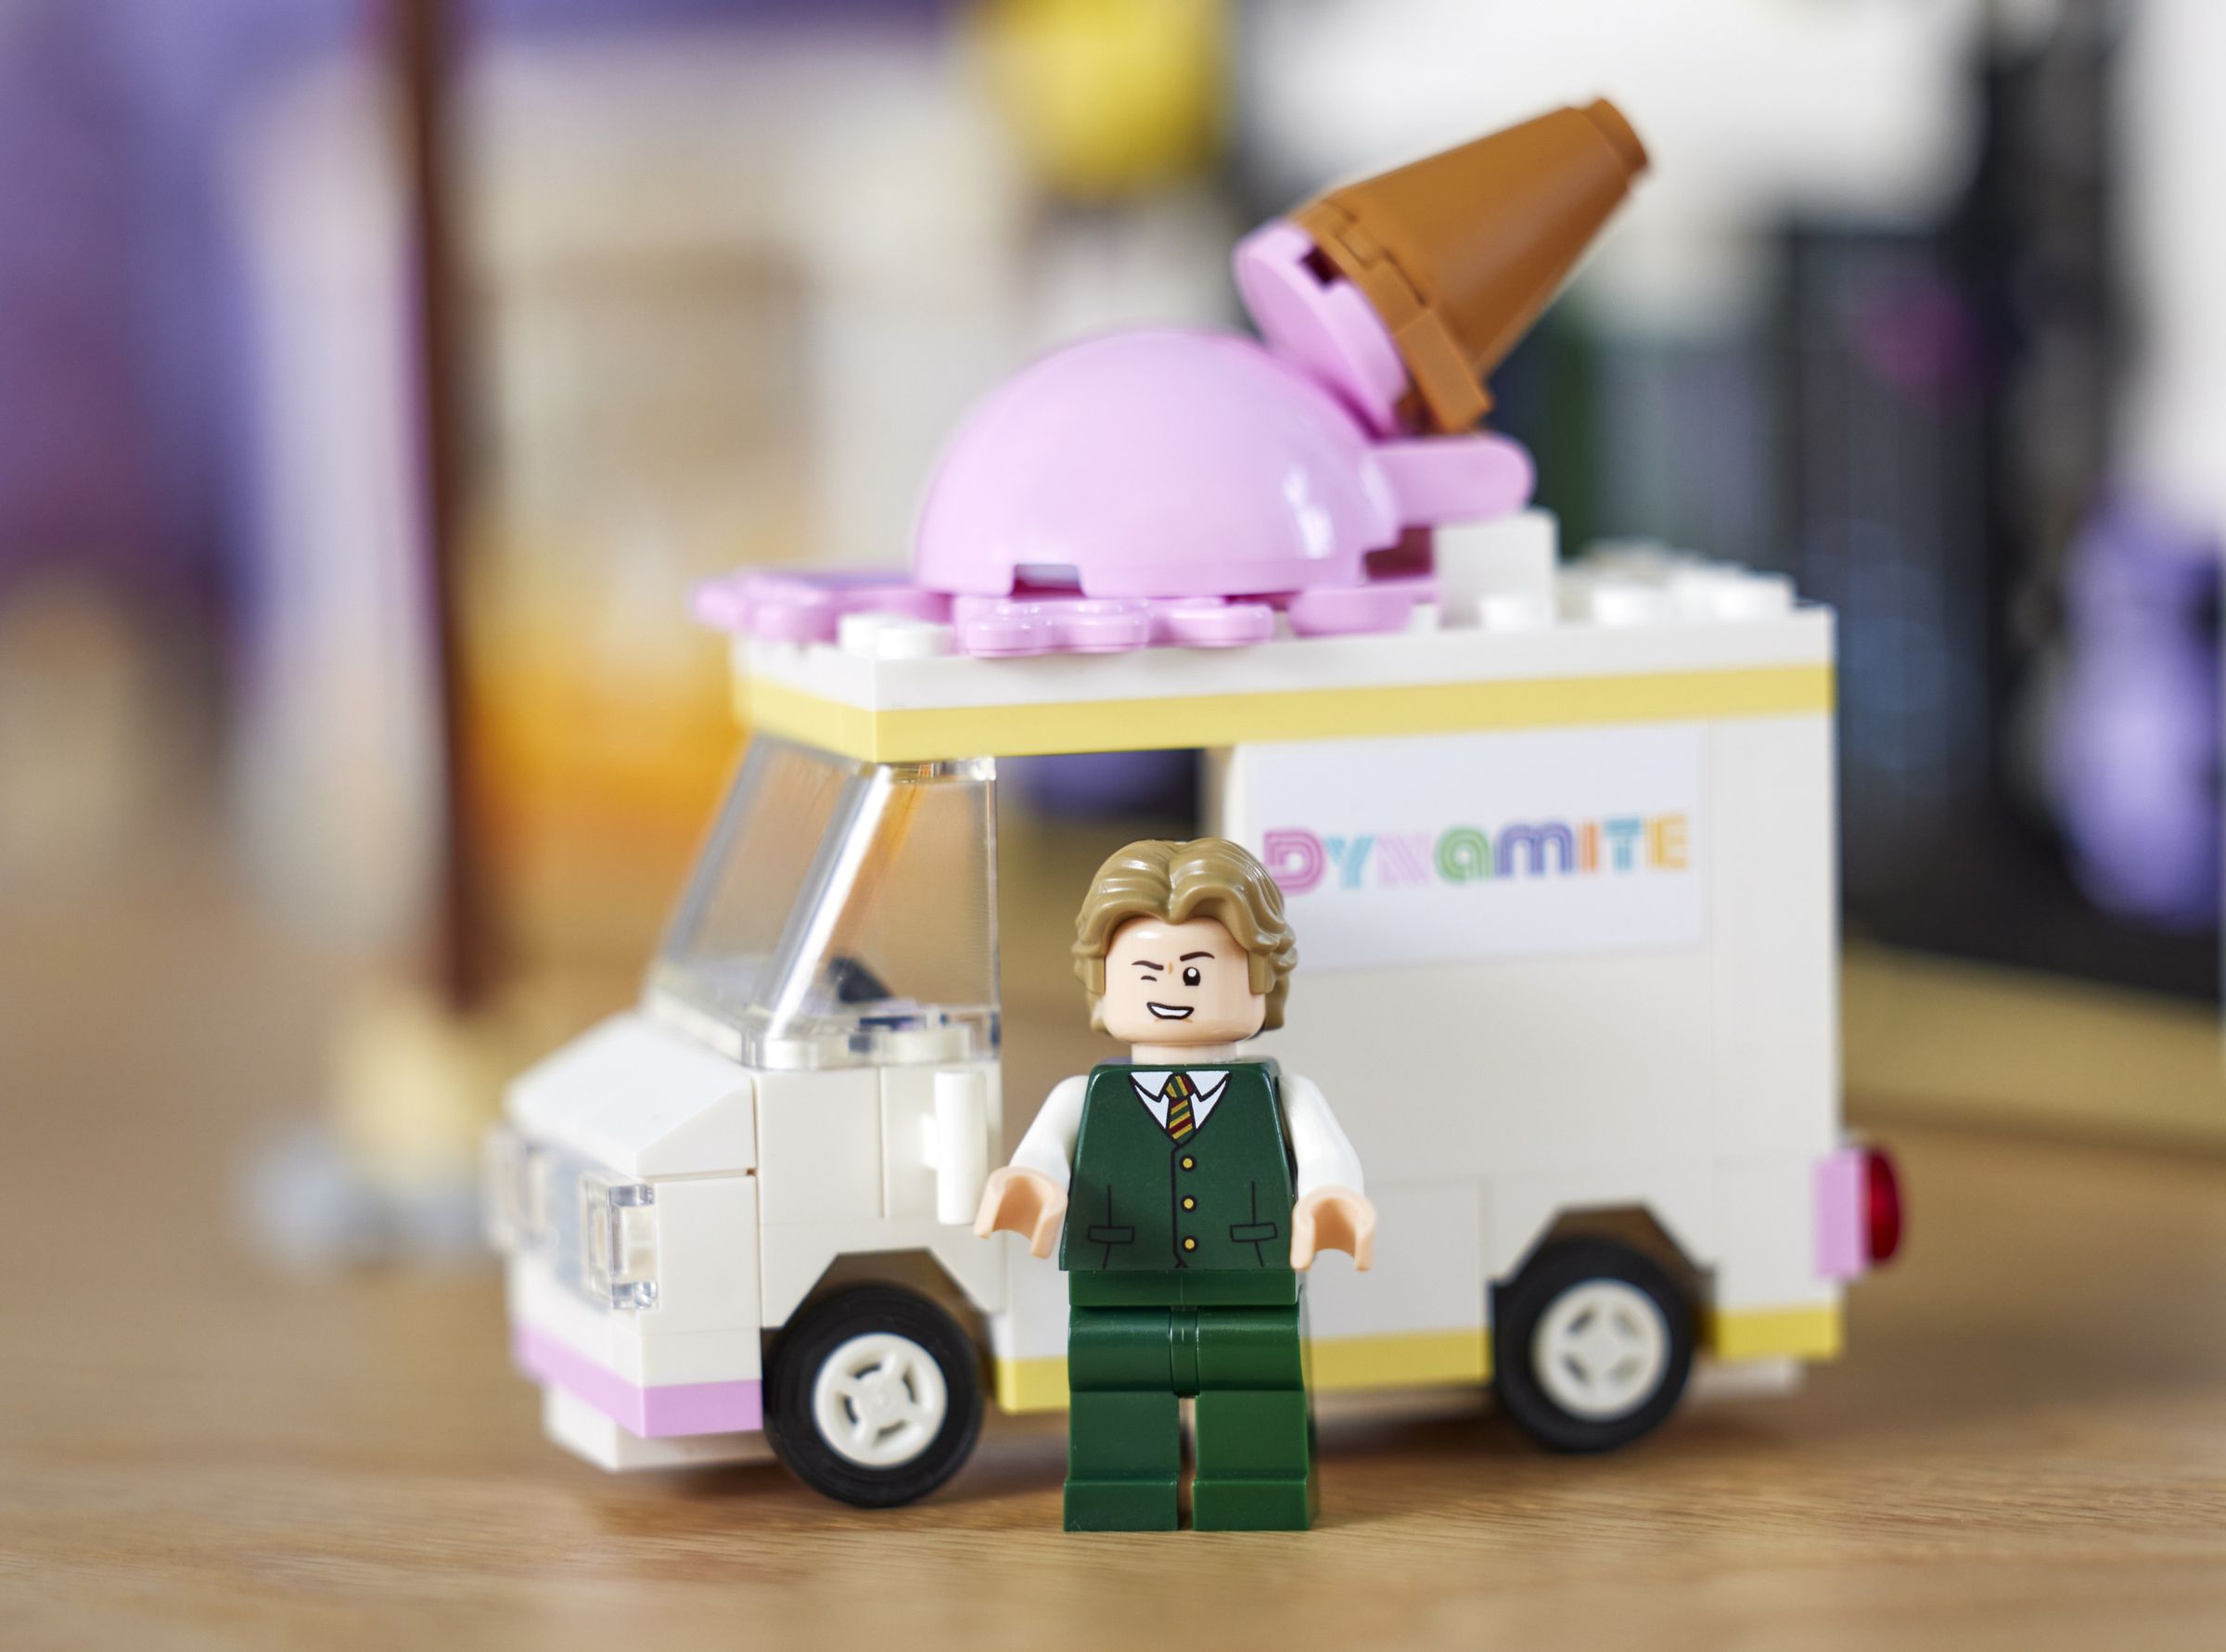 V Lego figurine winking in front of a Lego ice cream truck.